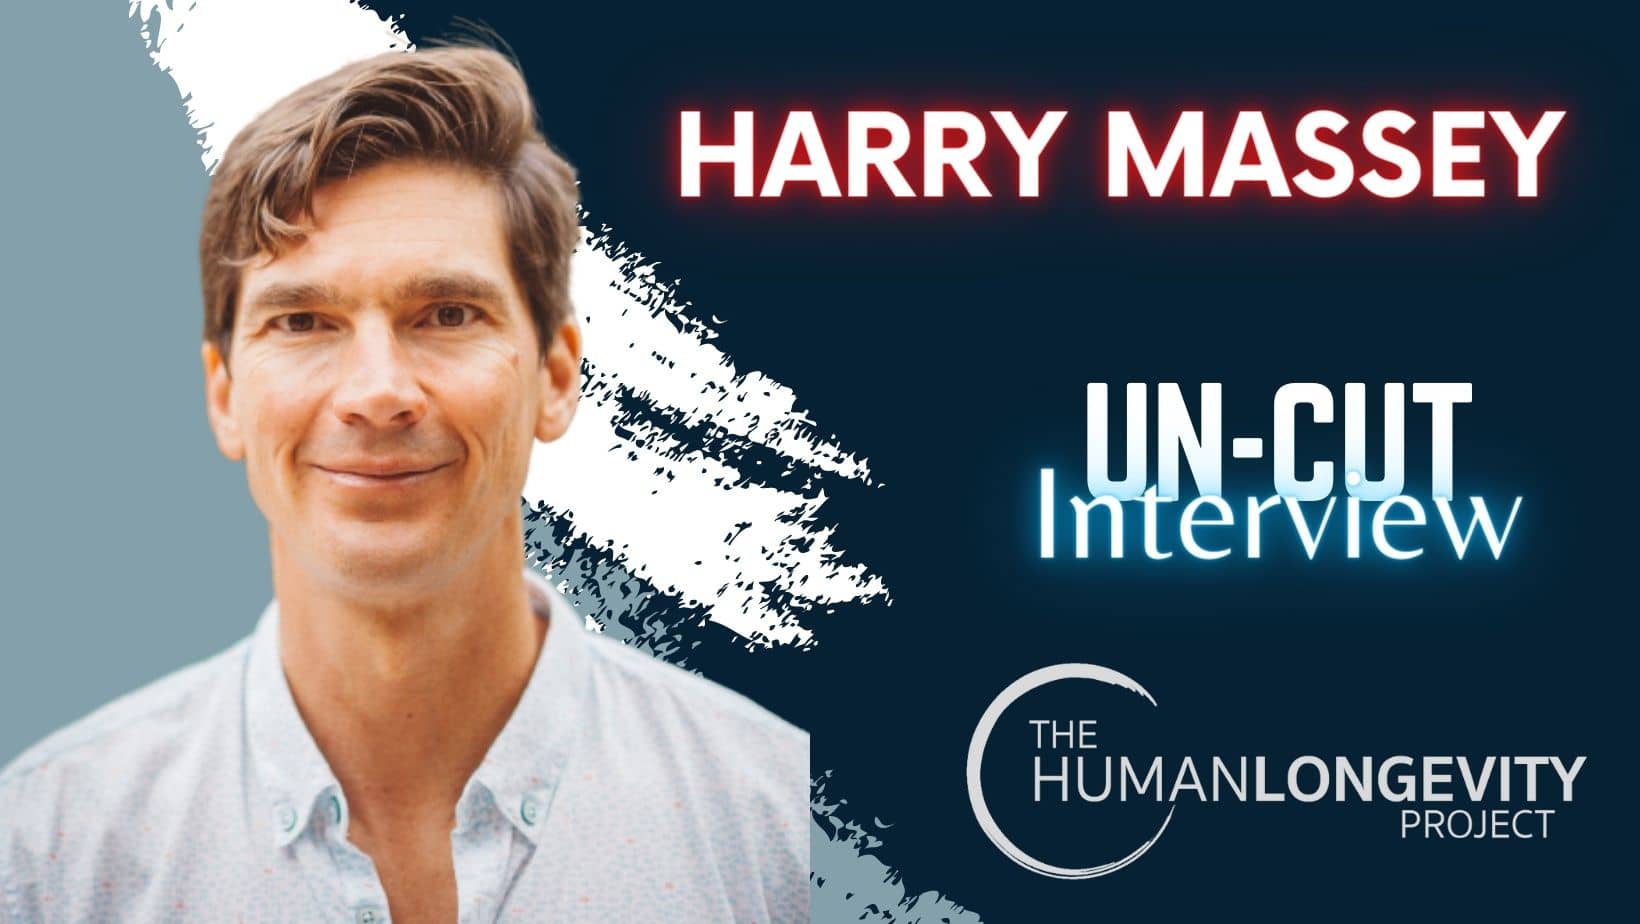 Human Longevity Project Uncut Interview With Harry Massey